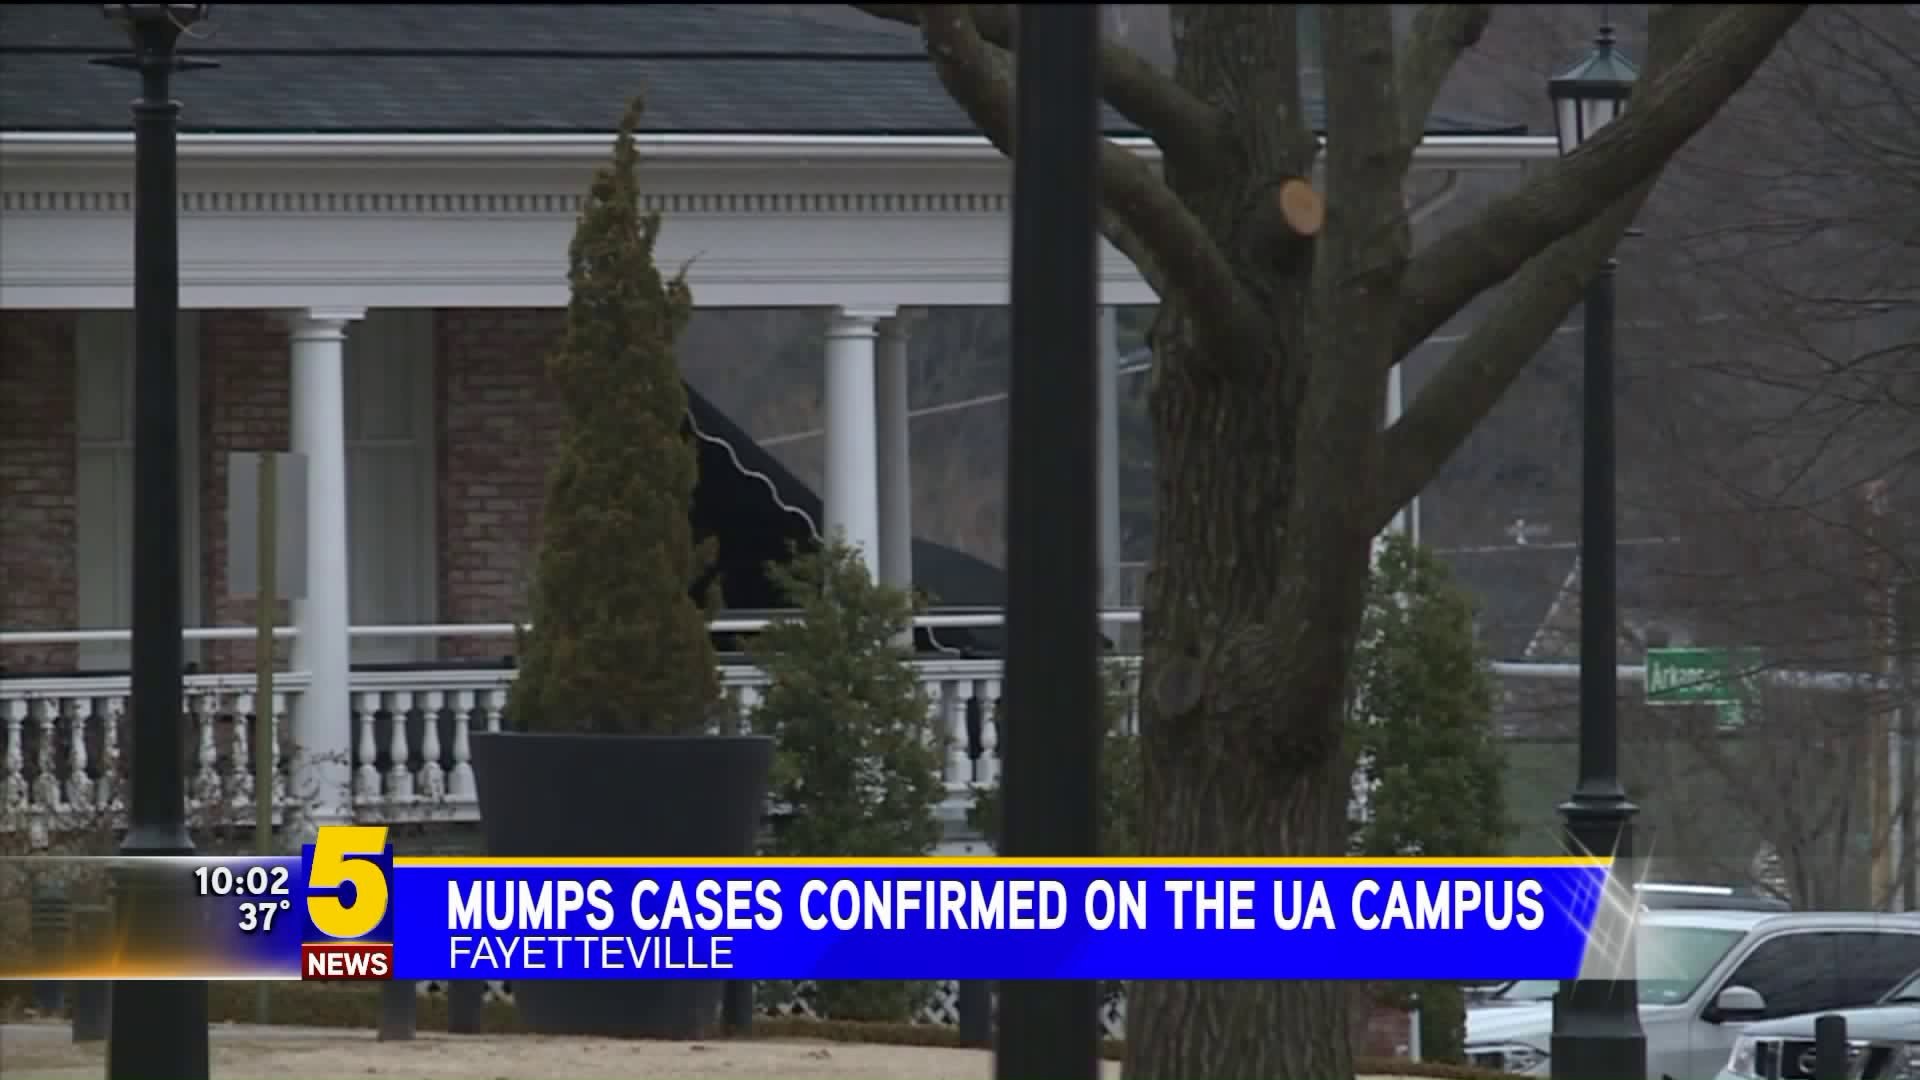 Mumps Cases Confirmed on UA Campus